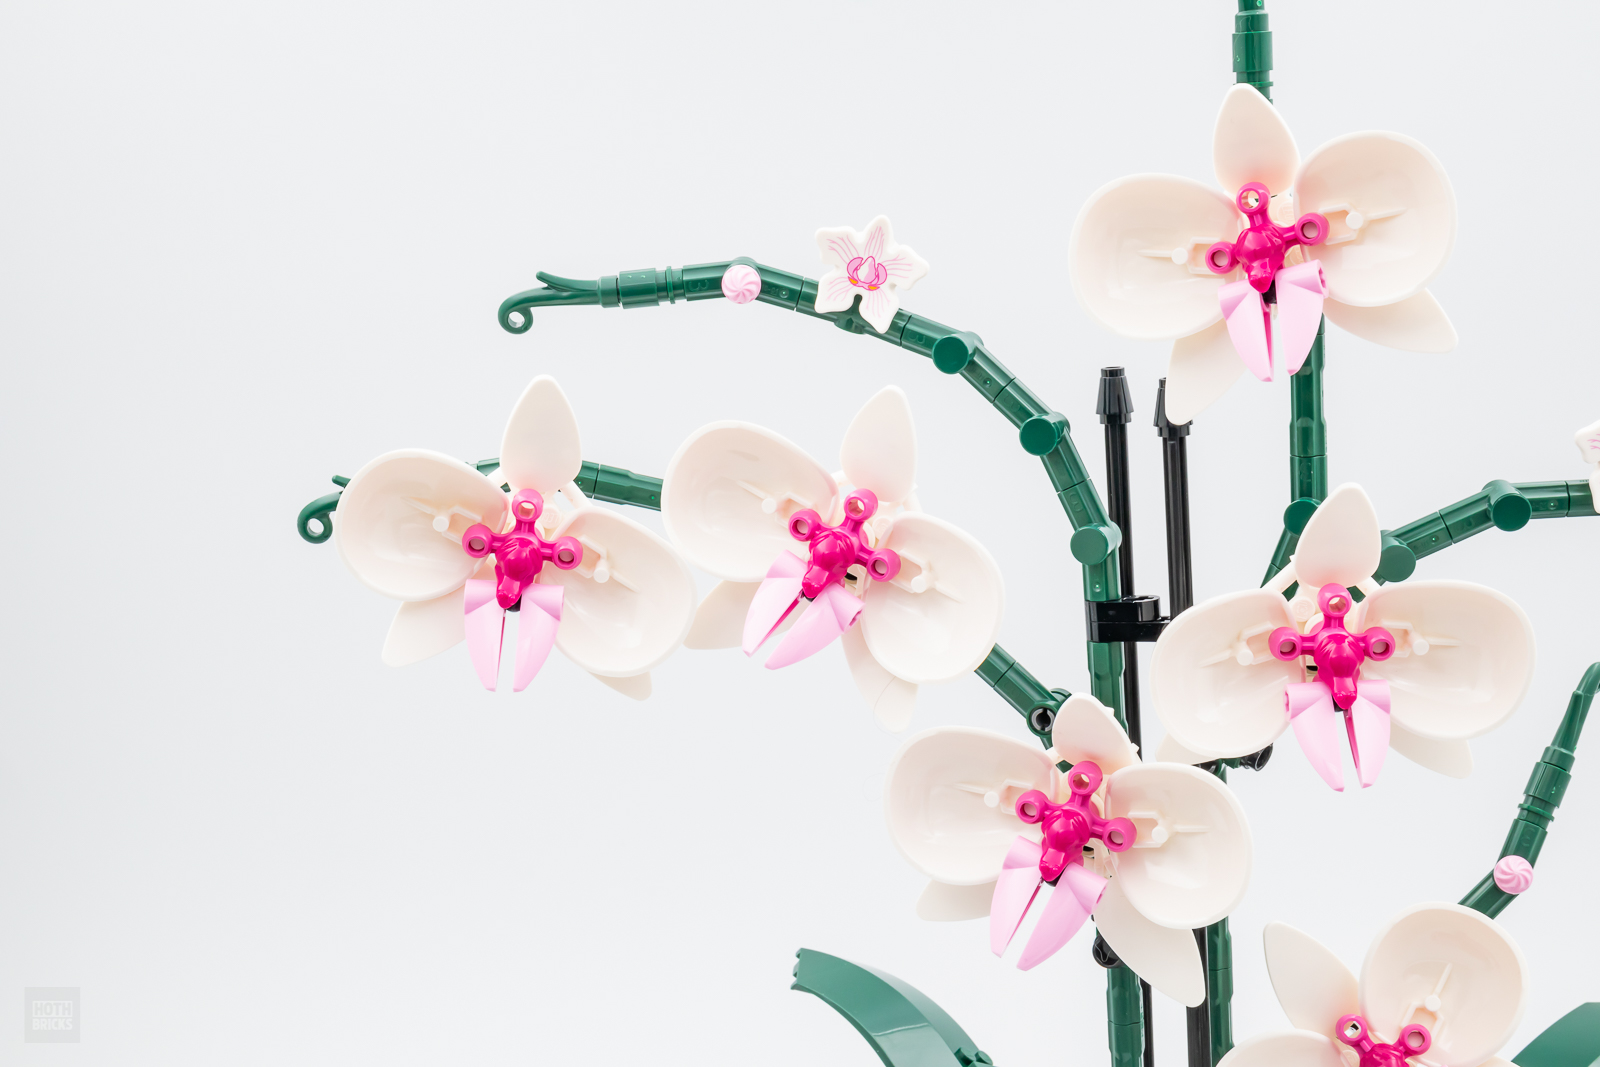 Review LEGO Botanical Collection 10311 Orchid - HelloBricks